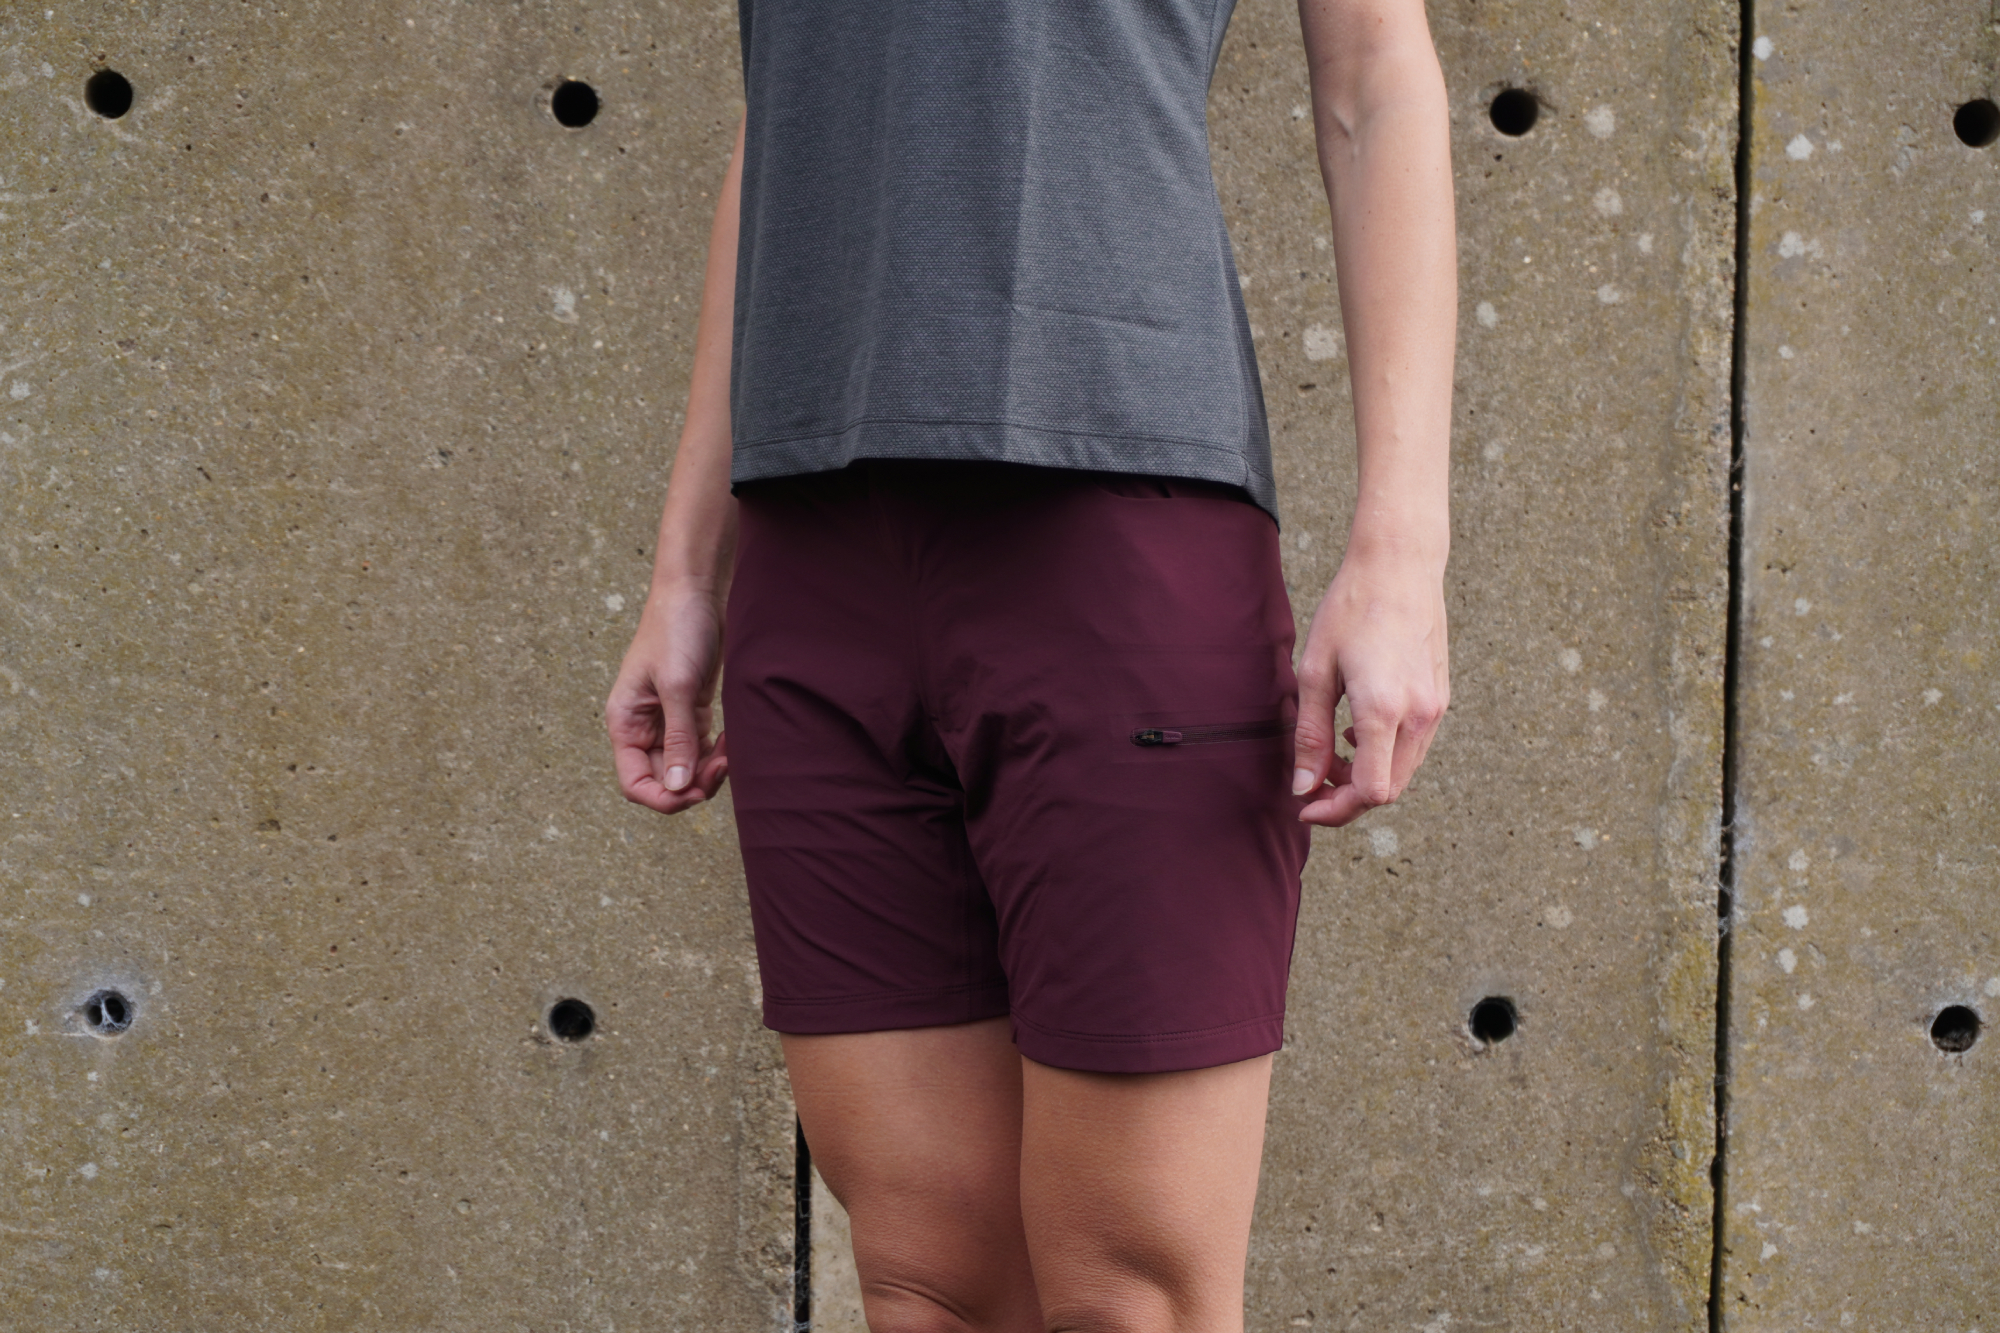 Anna Abram wearing the Rapha Women's Explore Shorts, which are among the best women's gravel cycling clothing